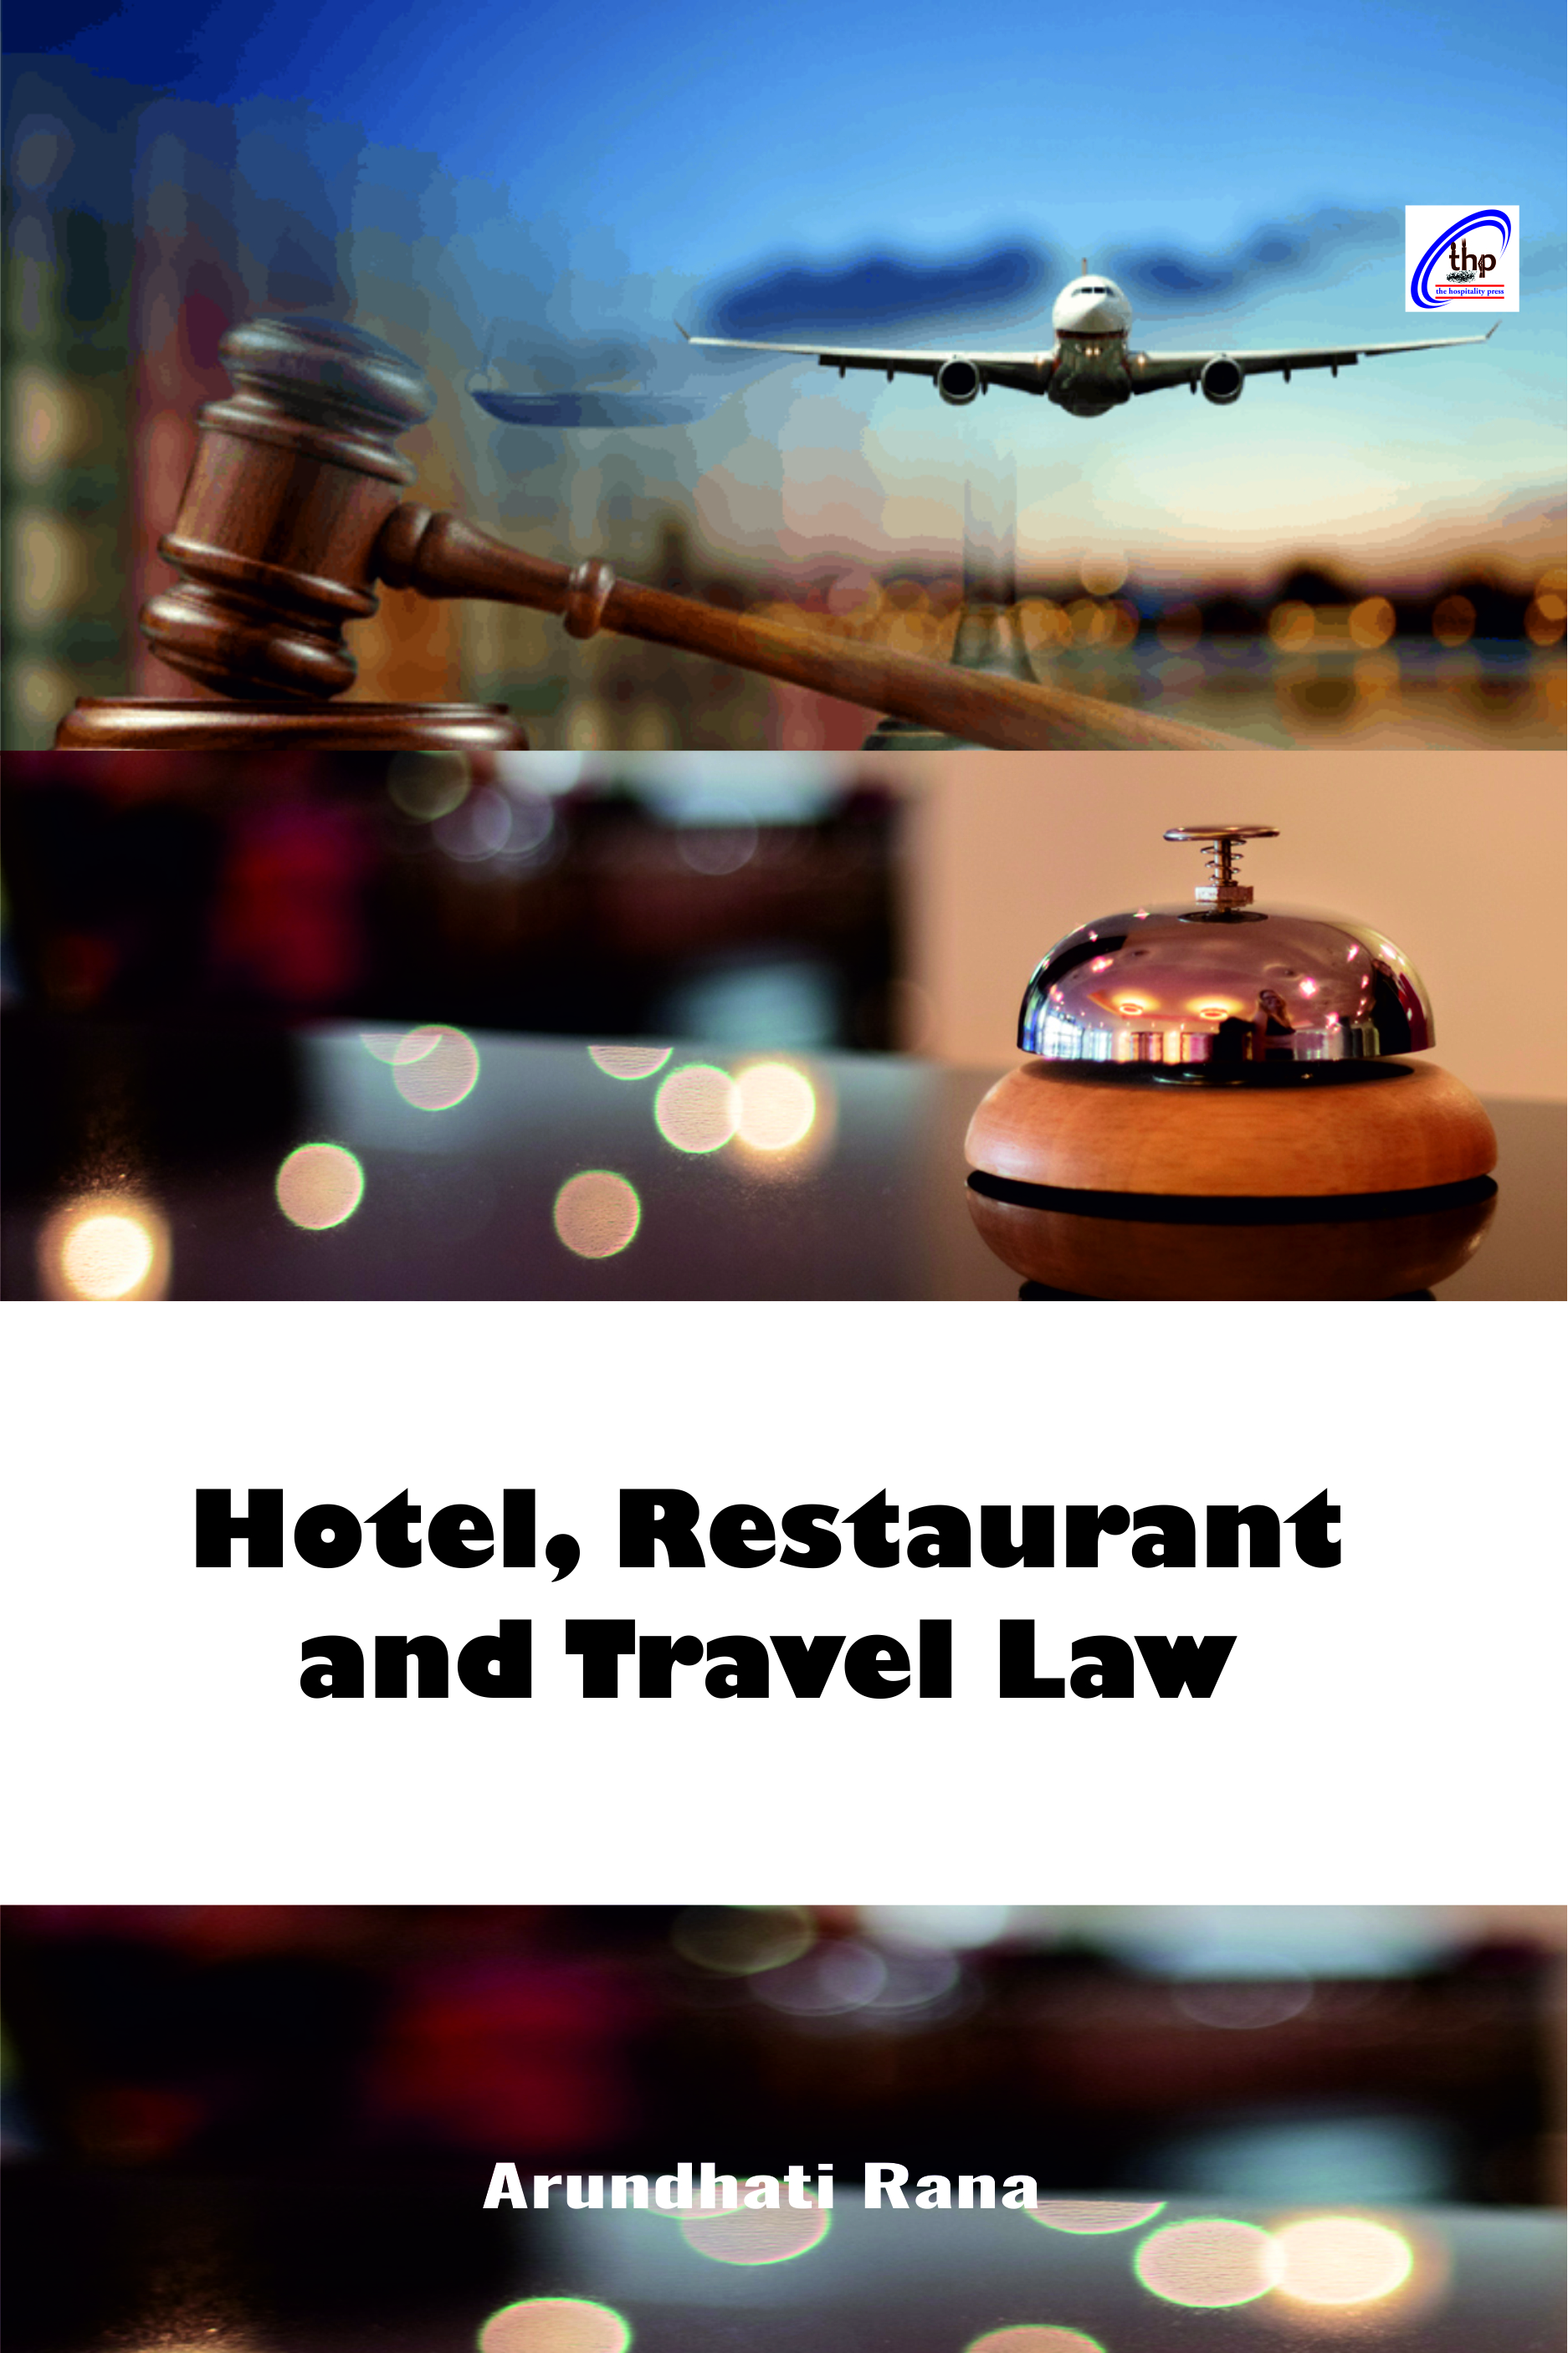 Hotel, Restaurant and Travel Law